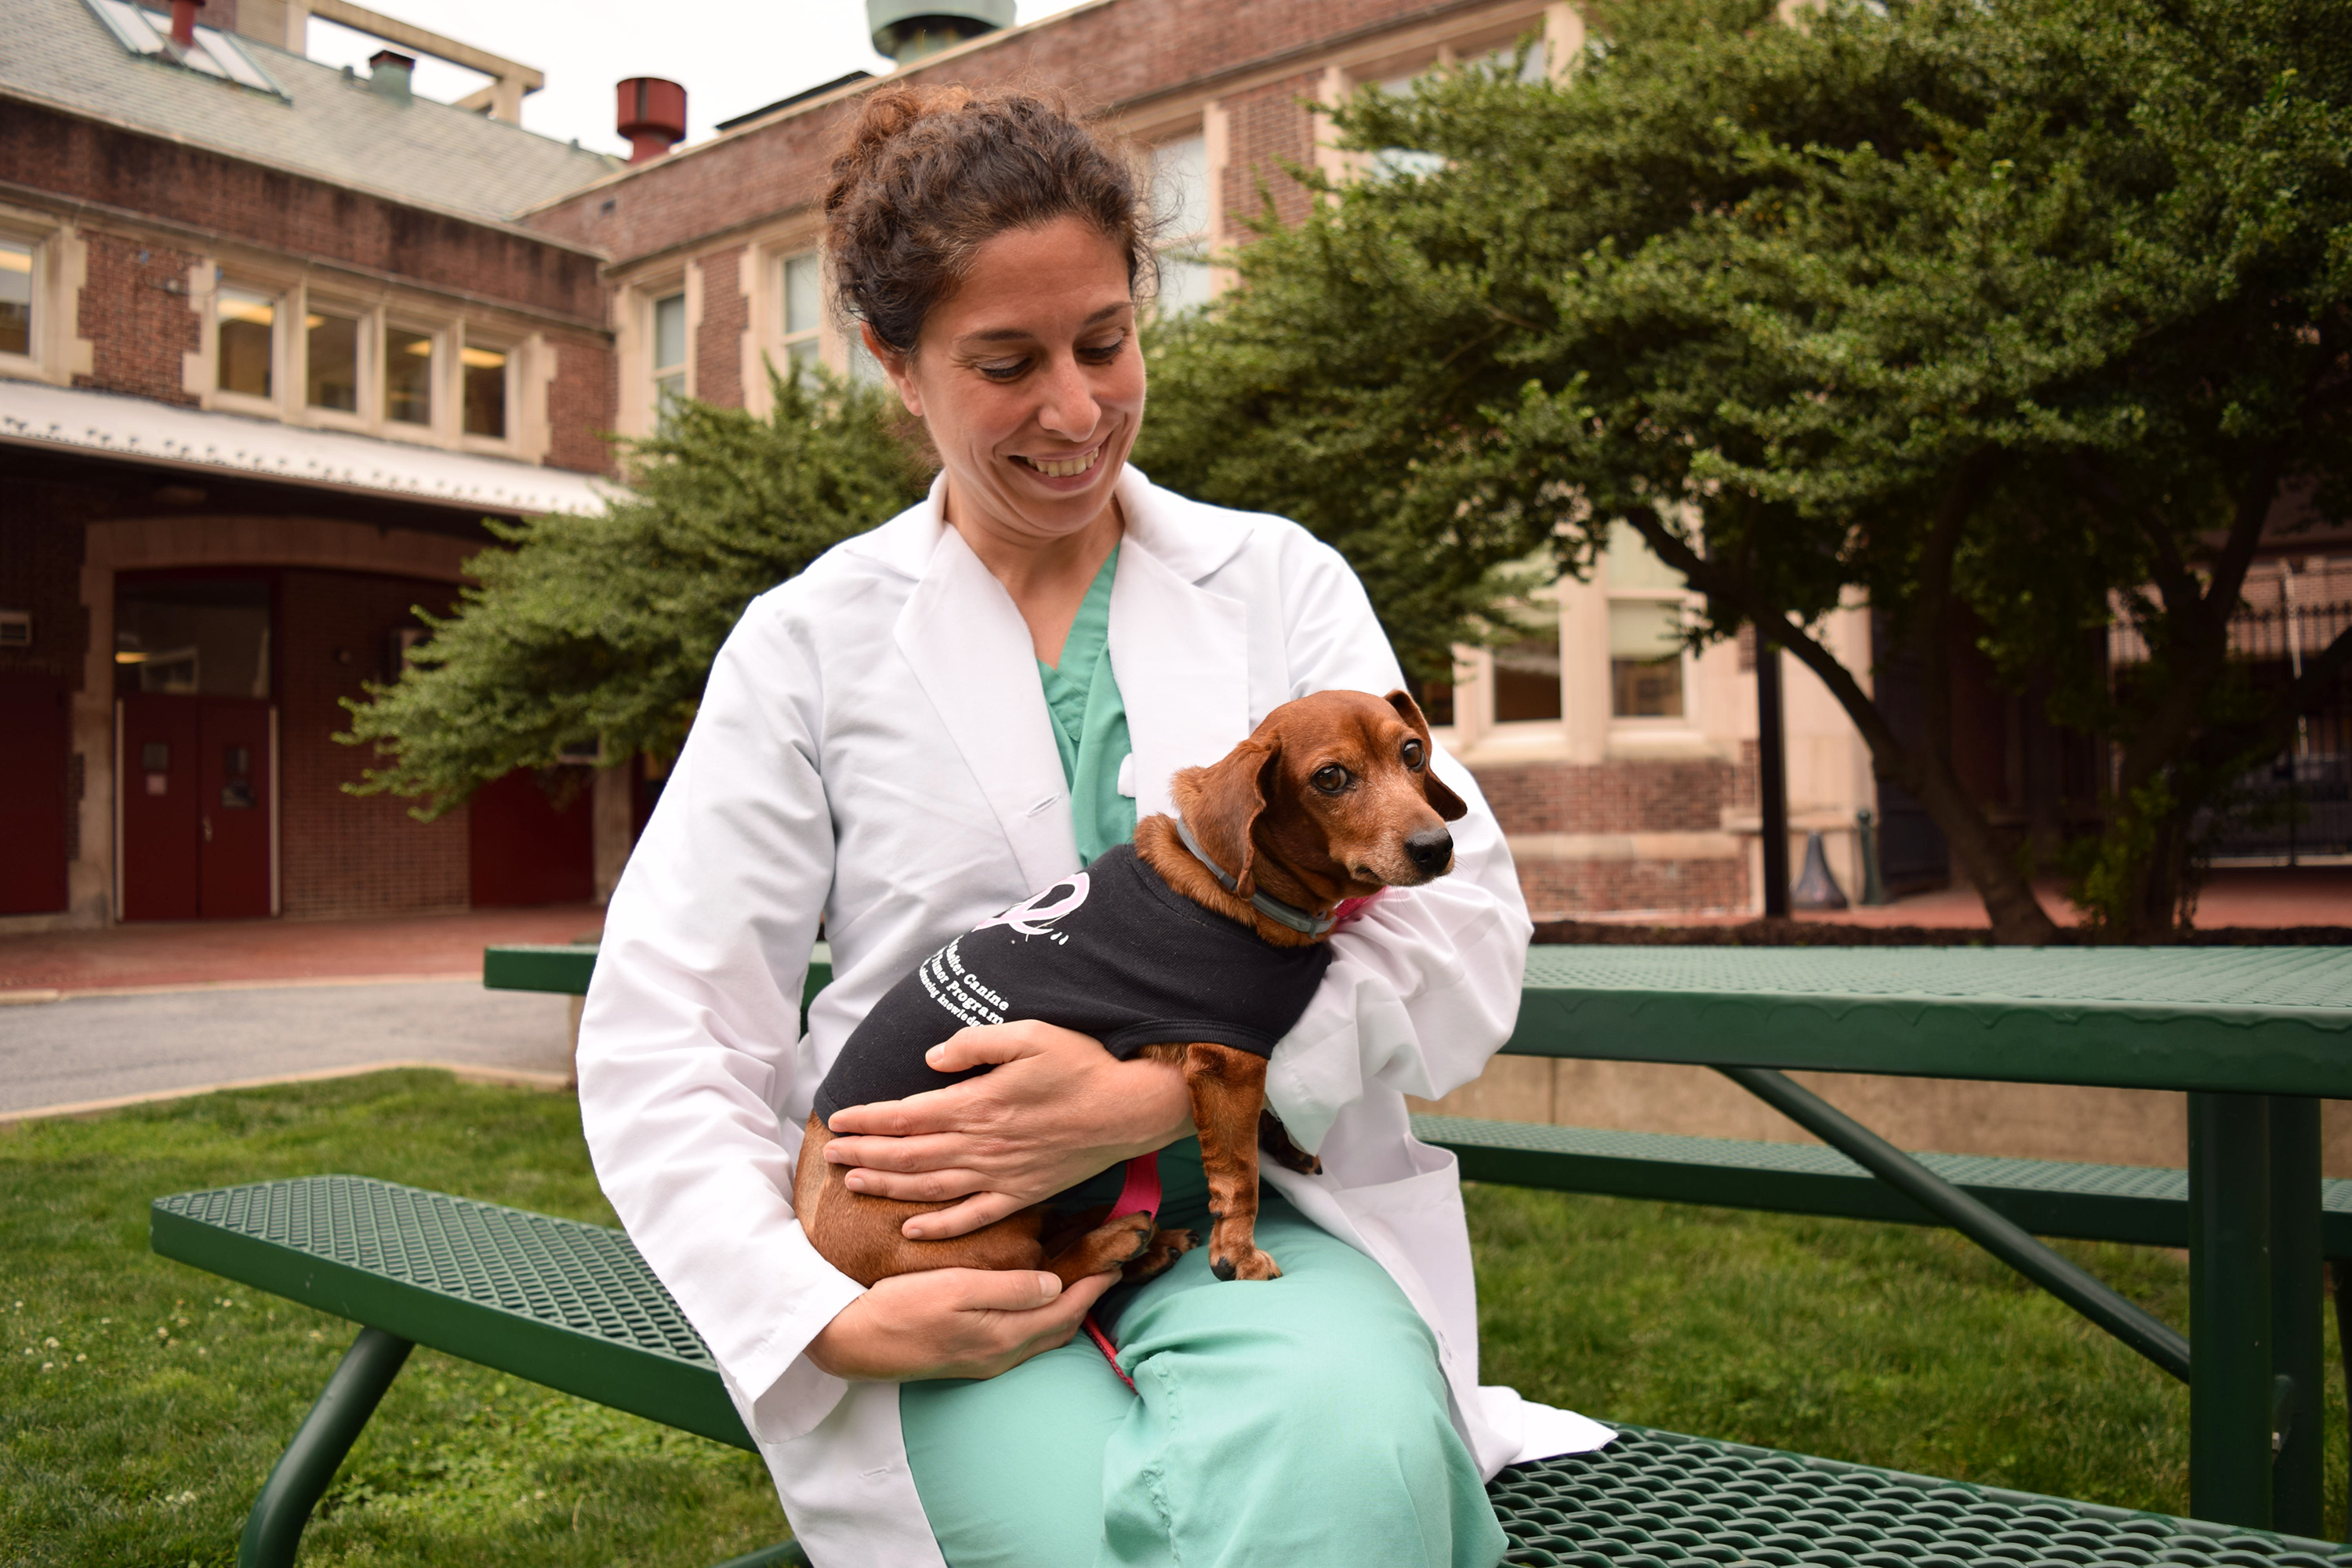 Veterinarian in white coat sitting at a picnic bench holds a dachshund wearing a black top